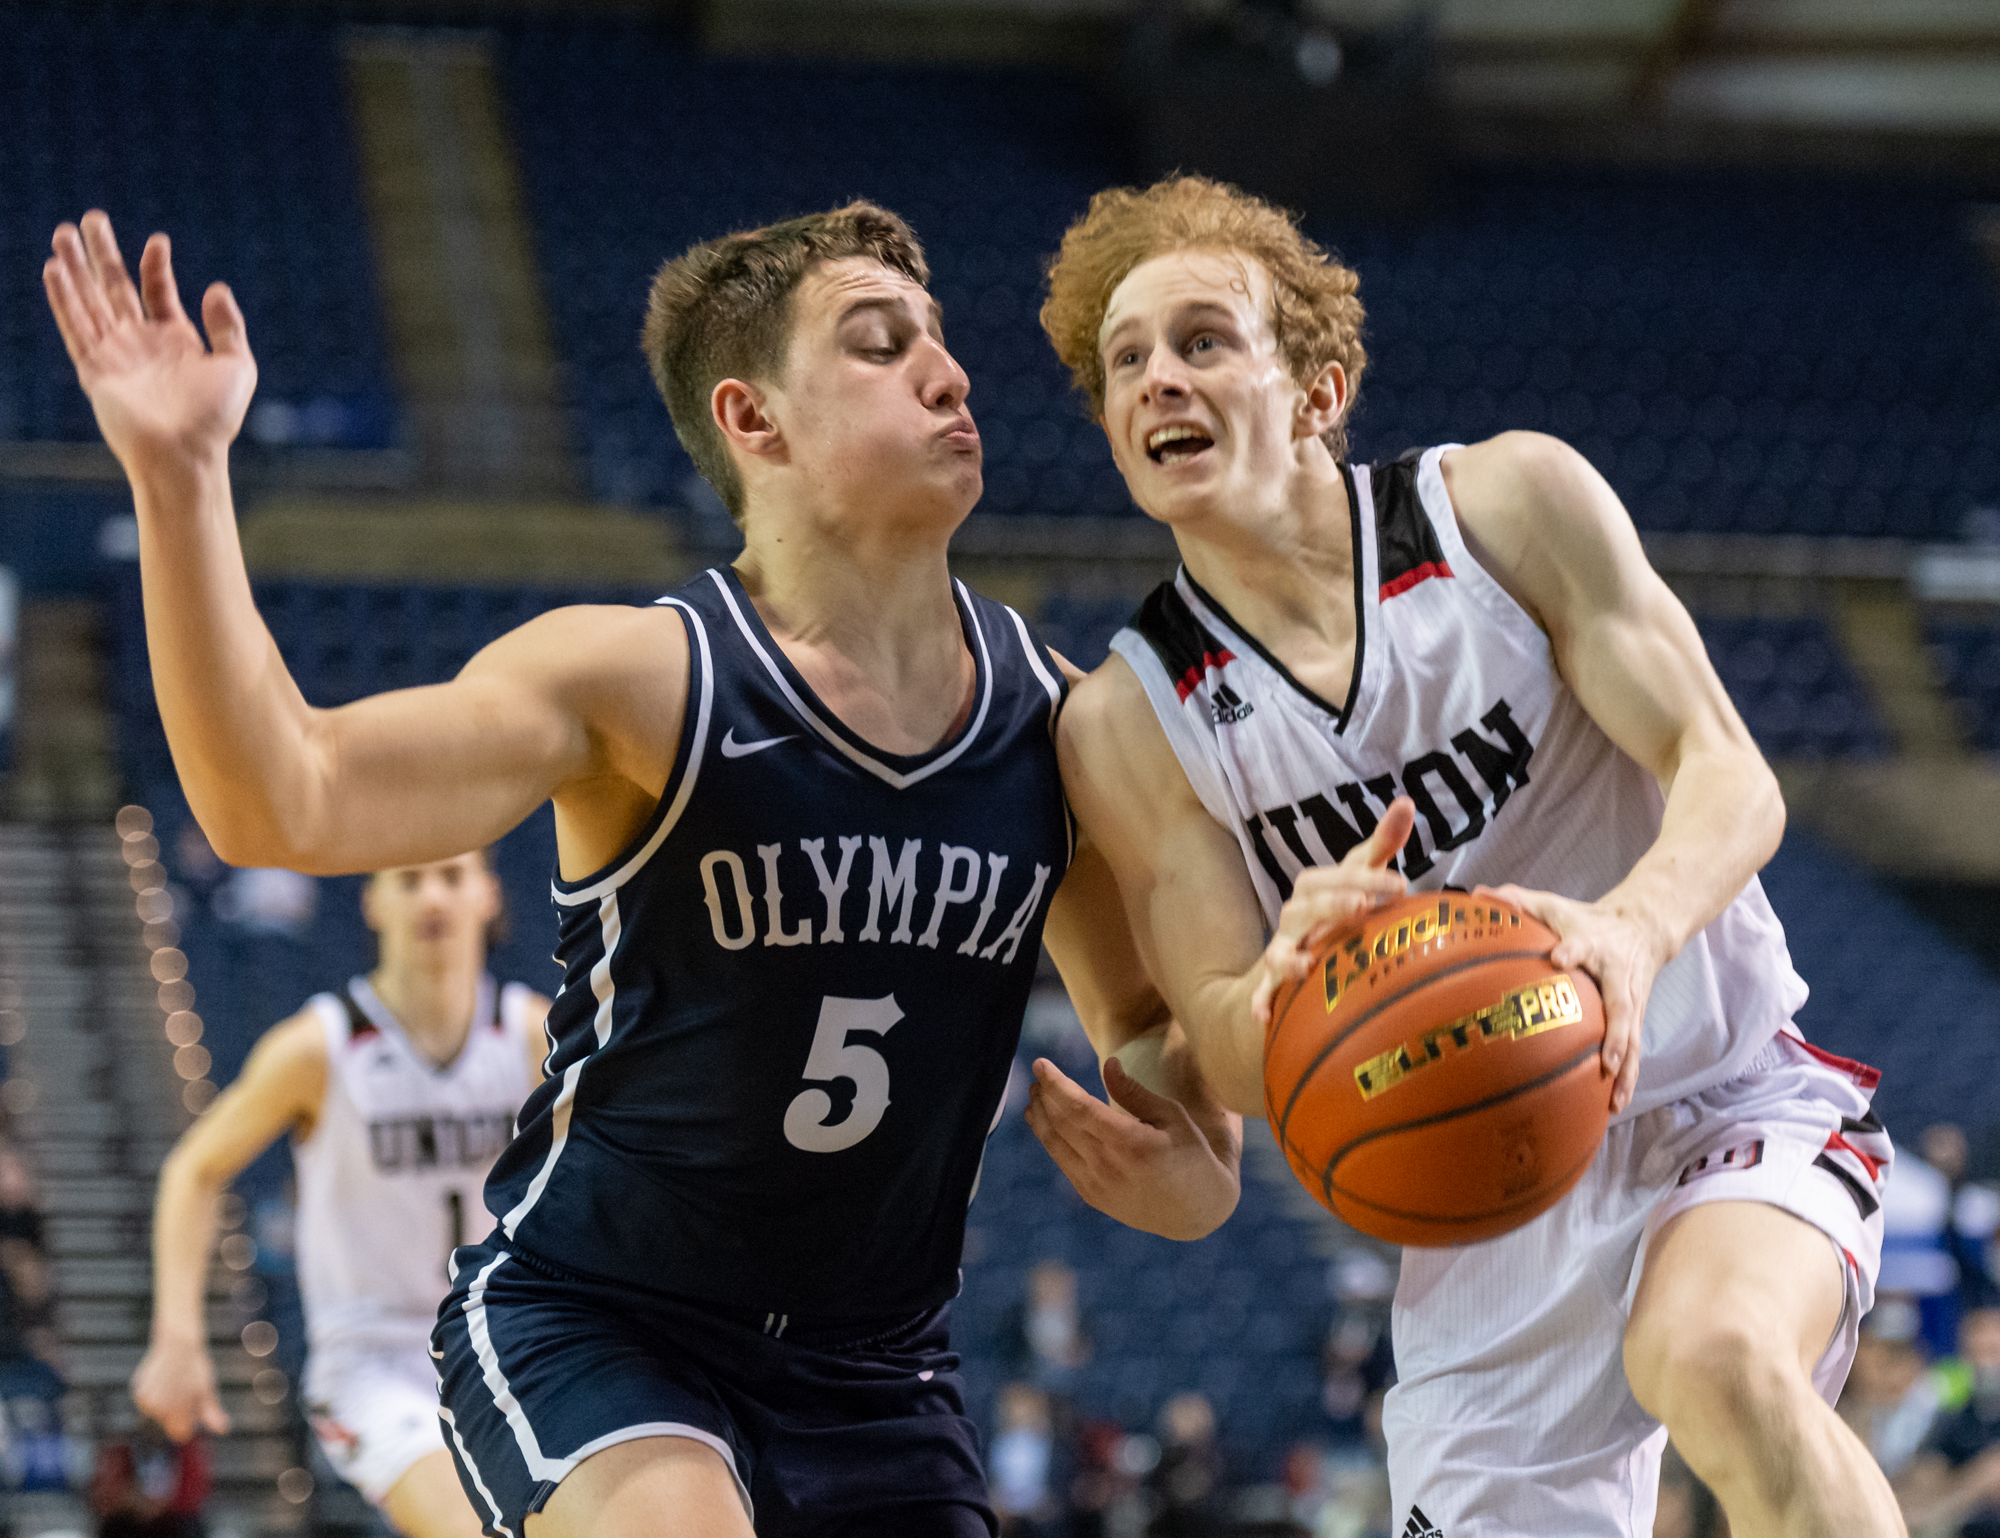 Union's Bryson Metz initiates contact with Olympia's Mason Juergens on his way for layup in a 4A State Boys Basketball third-place game on  Saturday, March 5, 2022, at the Tacoma Dome.